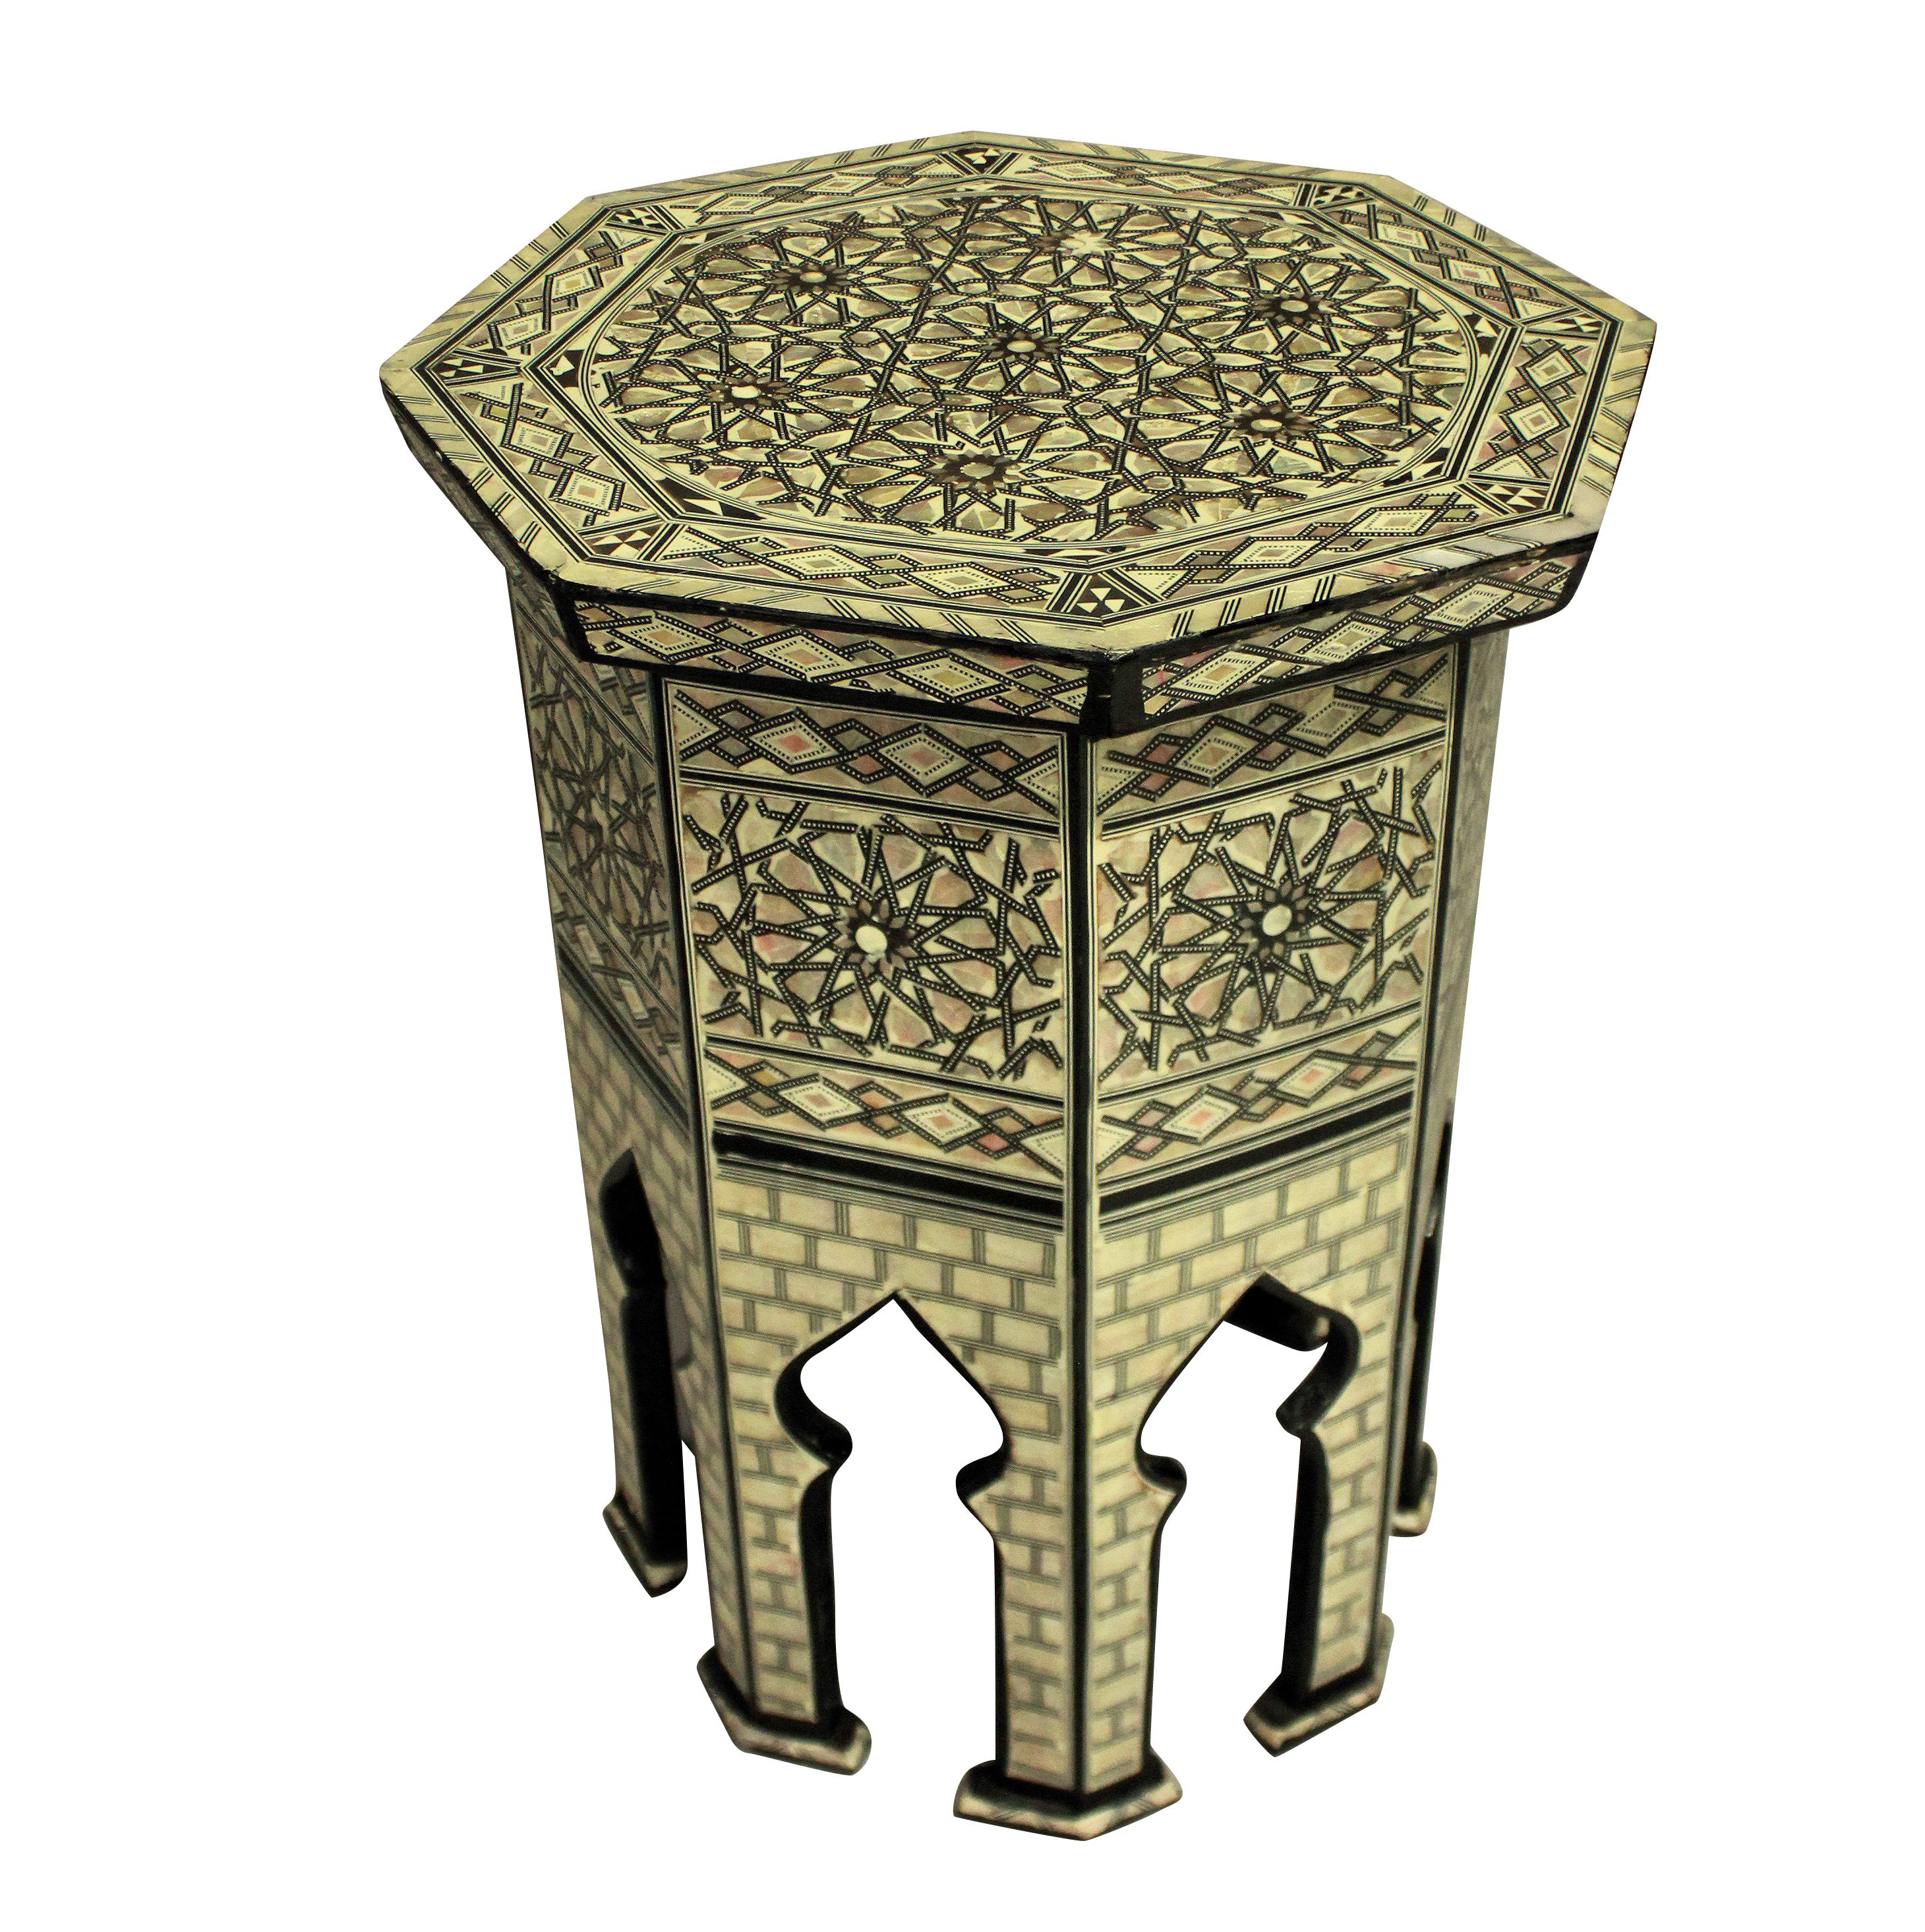 A fine Syrian side table inlaid with ebonized hardwood, bone and mother of pearl in geometric designs.